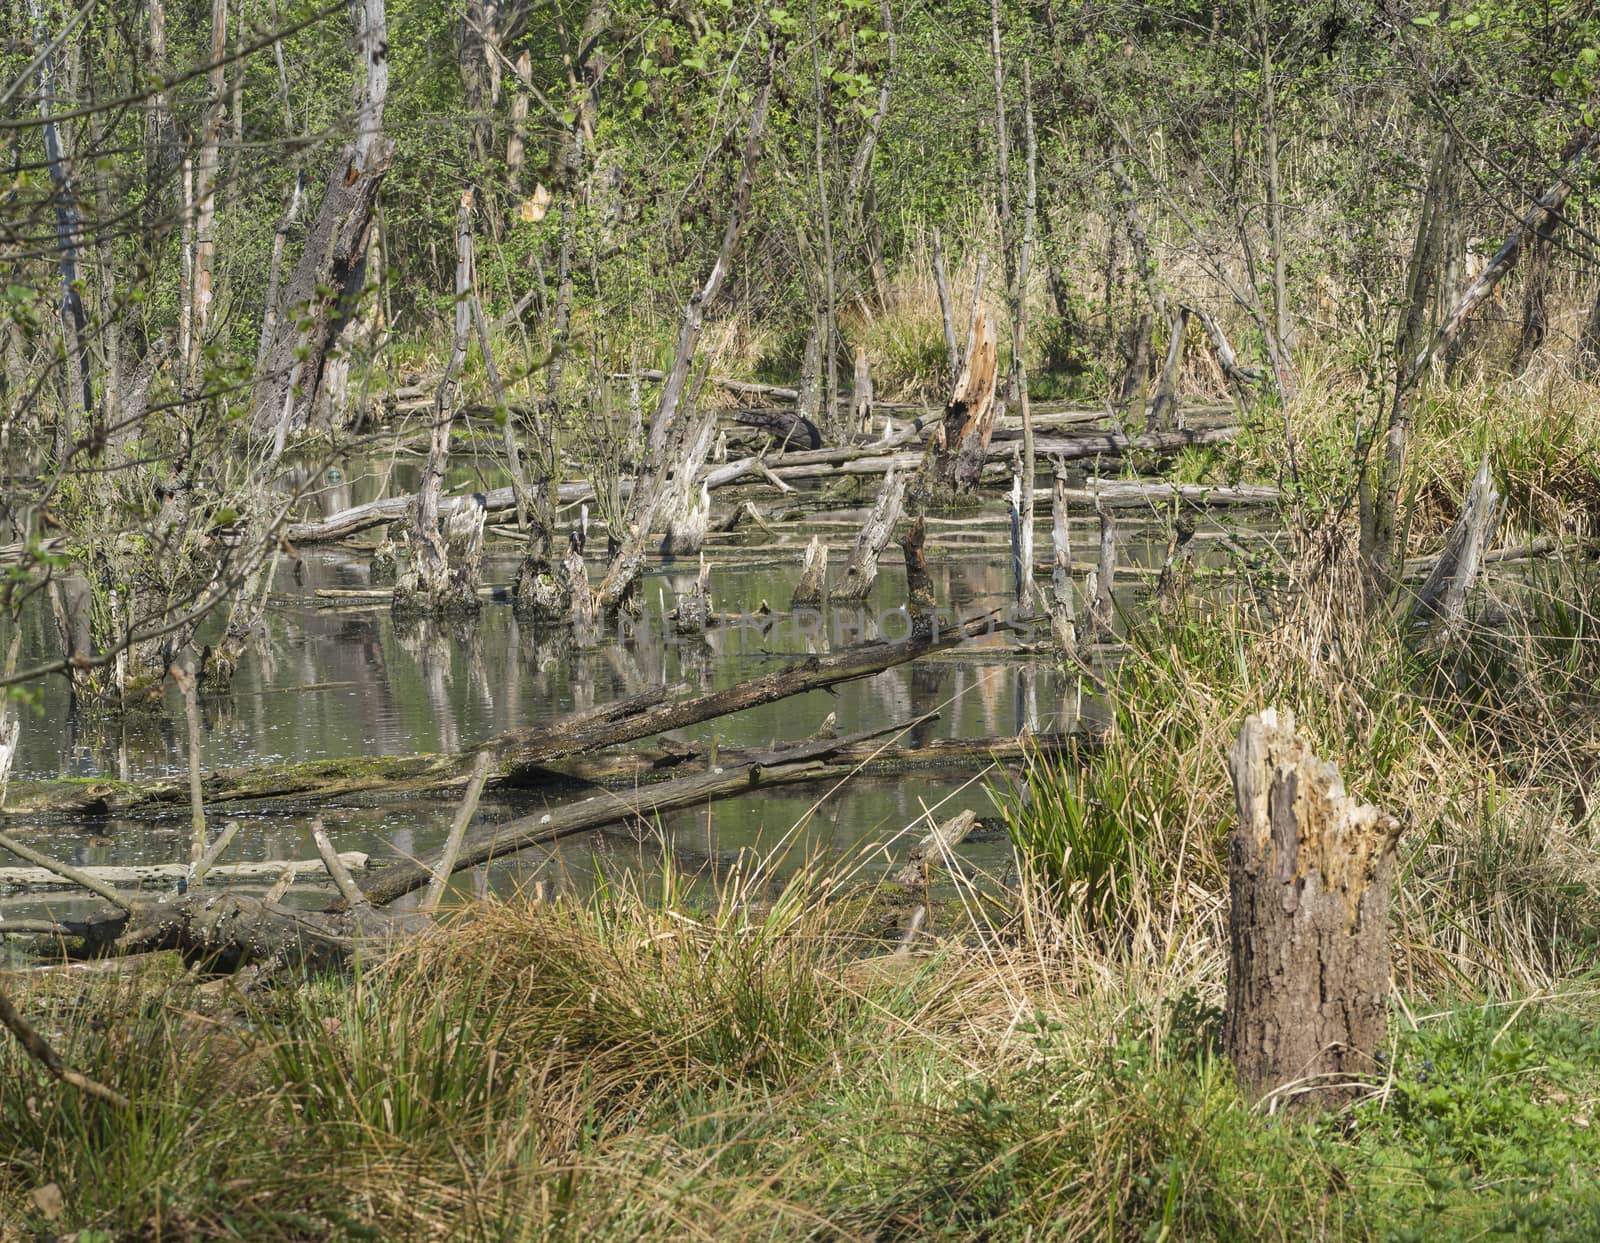 logs,trees and grass in swamp lake, spring marchland water landscape